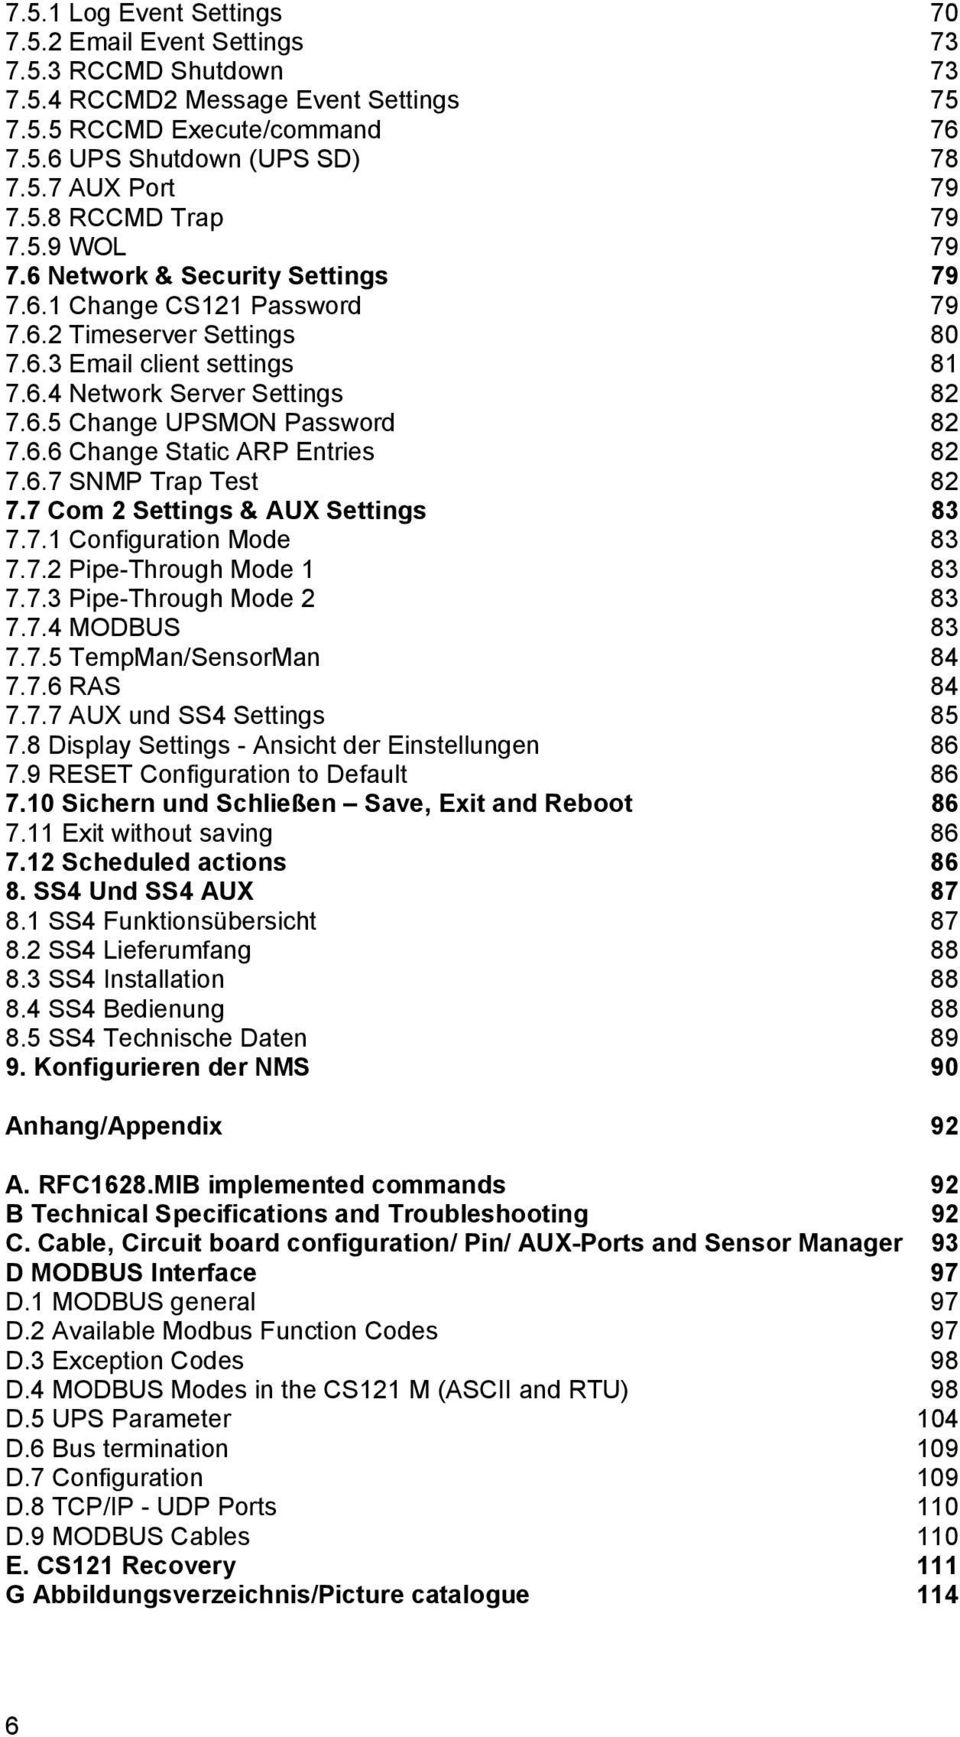 6.6 Change Static ARP Entries 82 7.6.7 SNMP Trap Test 82 7.7 Com 2 Settings & AUX Settings 83 7.7. Configuration Mode 83 7.7.2 Pipe-Through Mode 83 7.7.3 Pipe-Through Mode 2 83 7.7.4 MODBUS 83 7.7.5 TempMan/SensorMan 84 7.